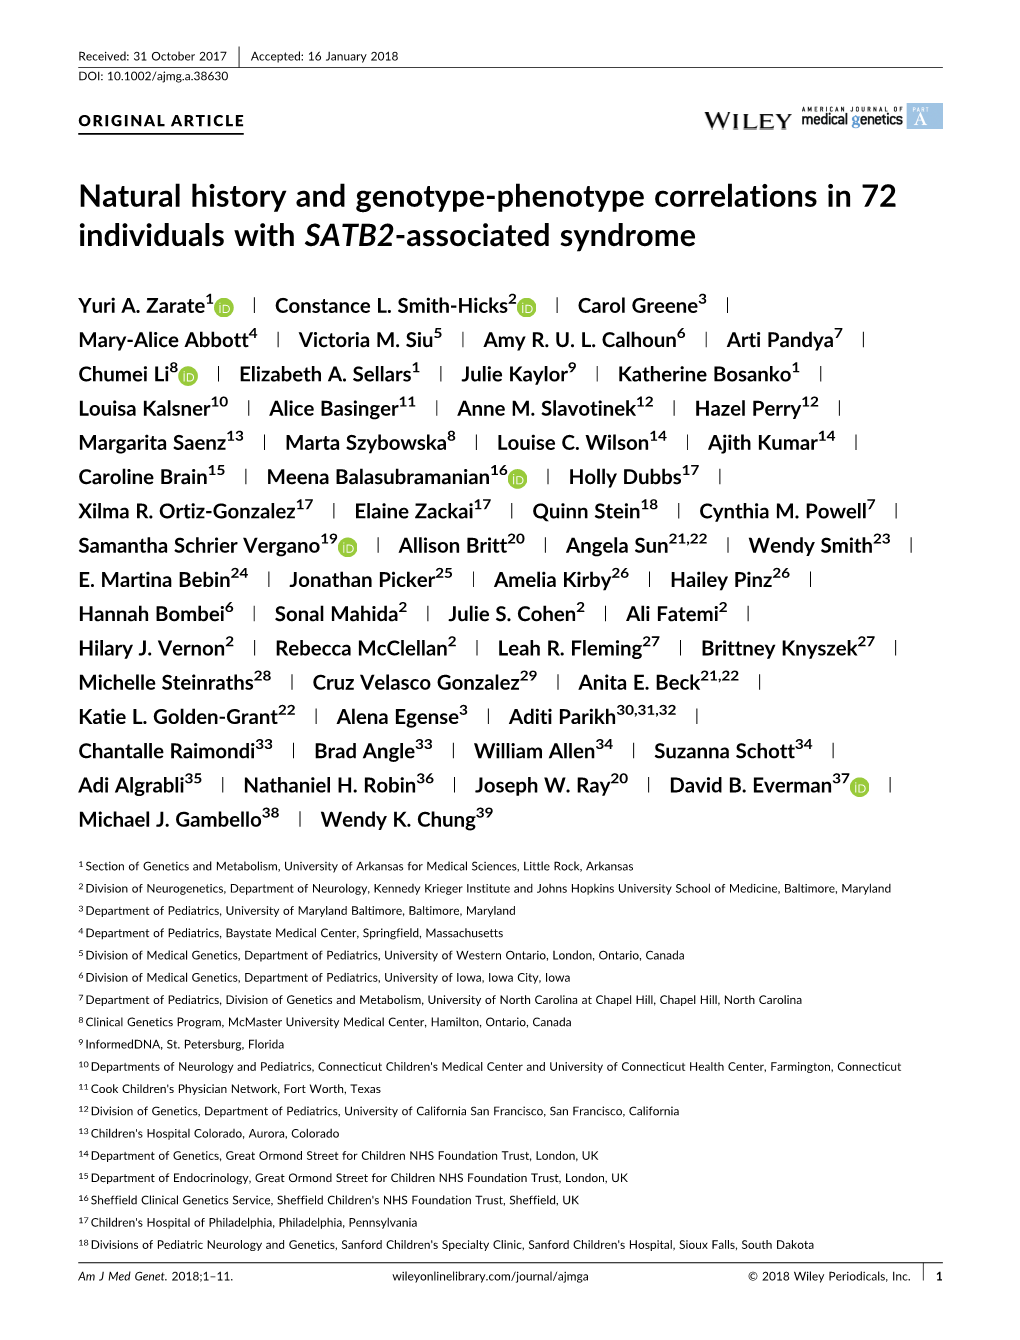 Natural History and Genotype-Phenotype Correlations in 72 Individuals with SATB2-Associated Syndrome